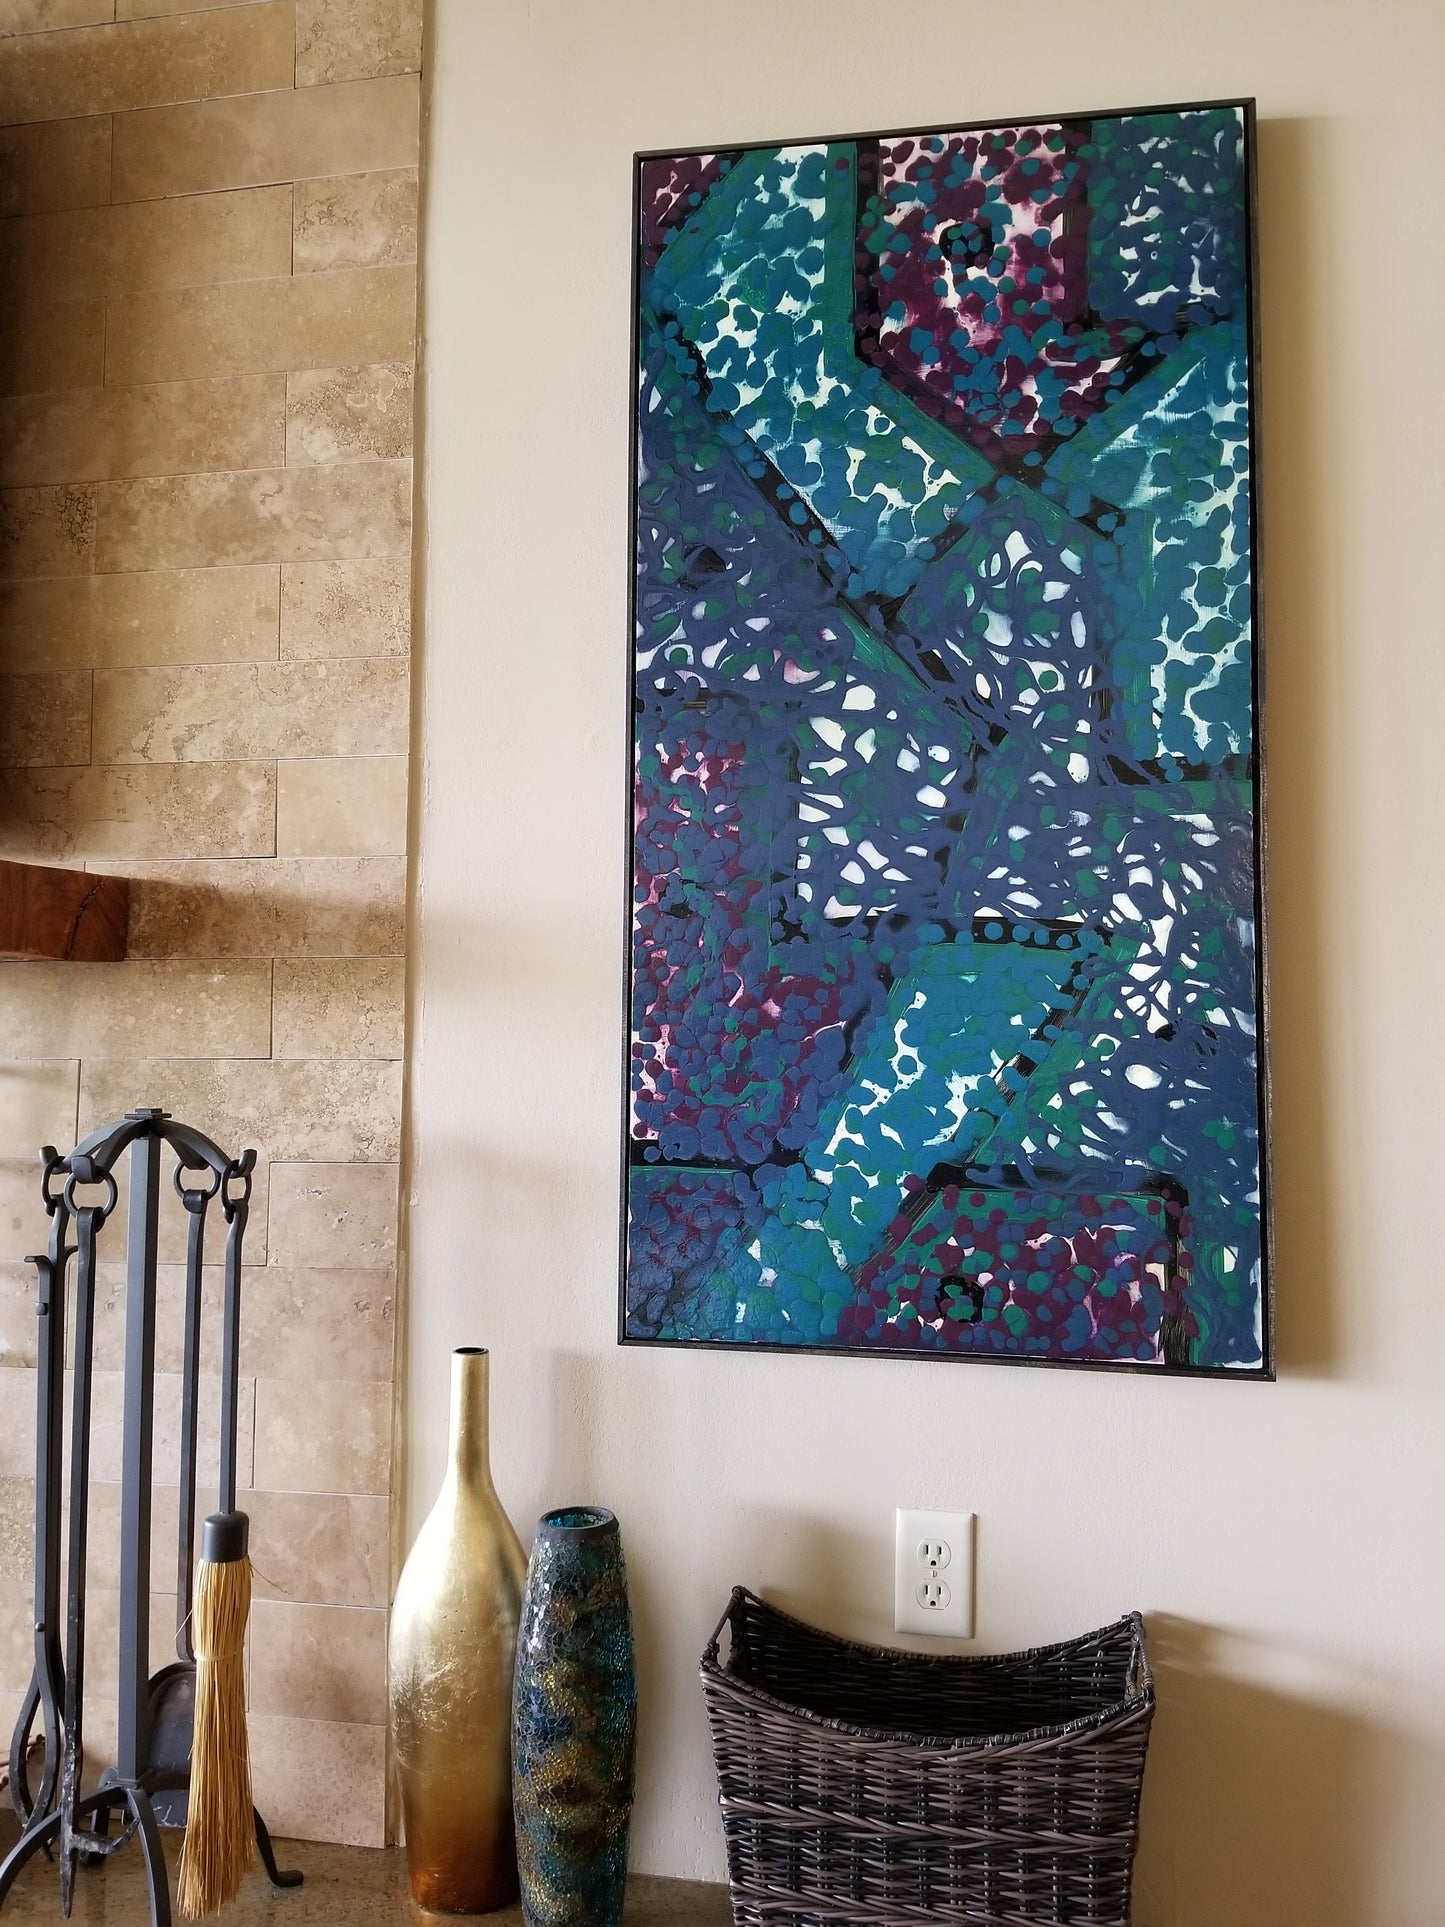 Looking Out - Original Abstract Painting in Austin Texas 24" x 48"